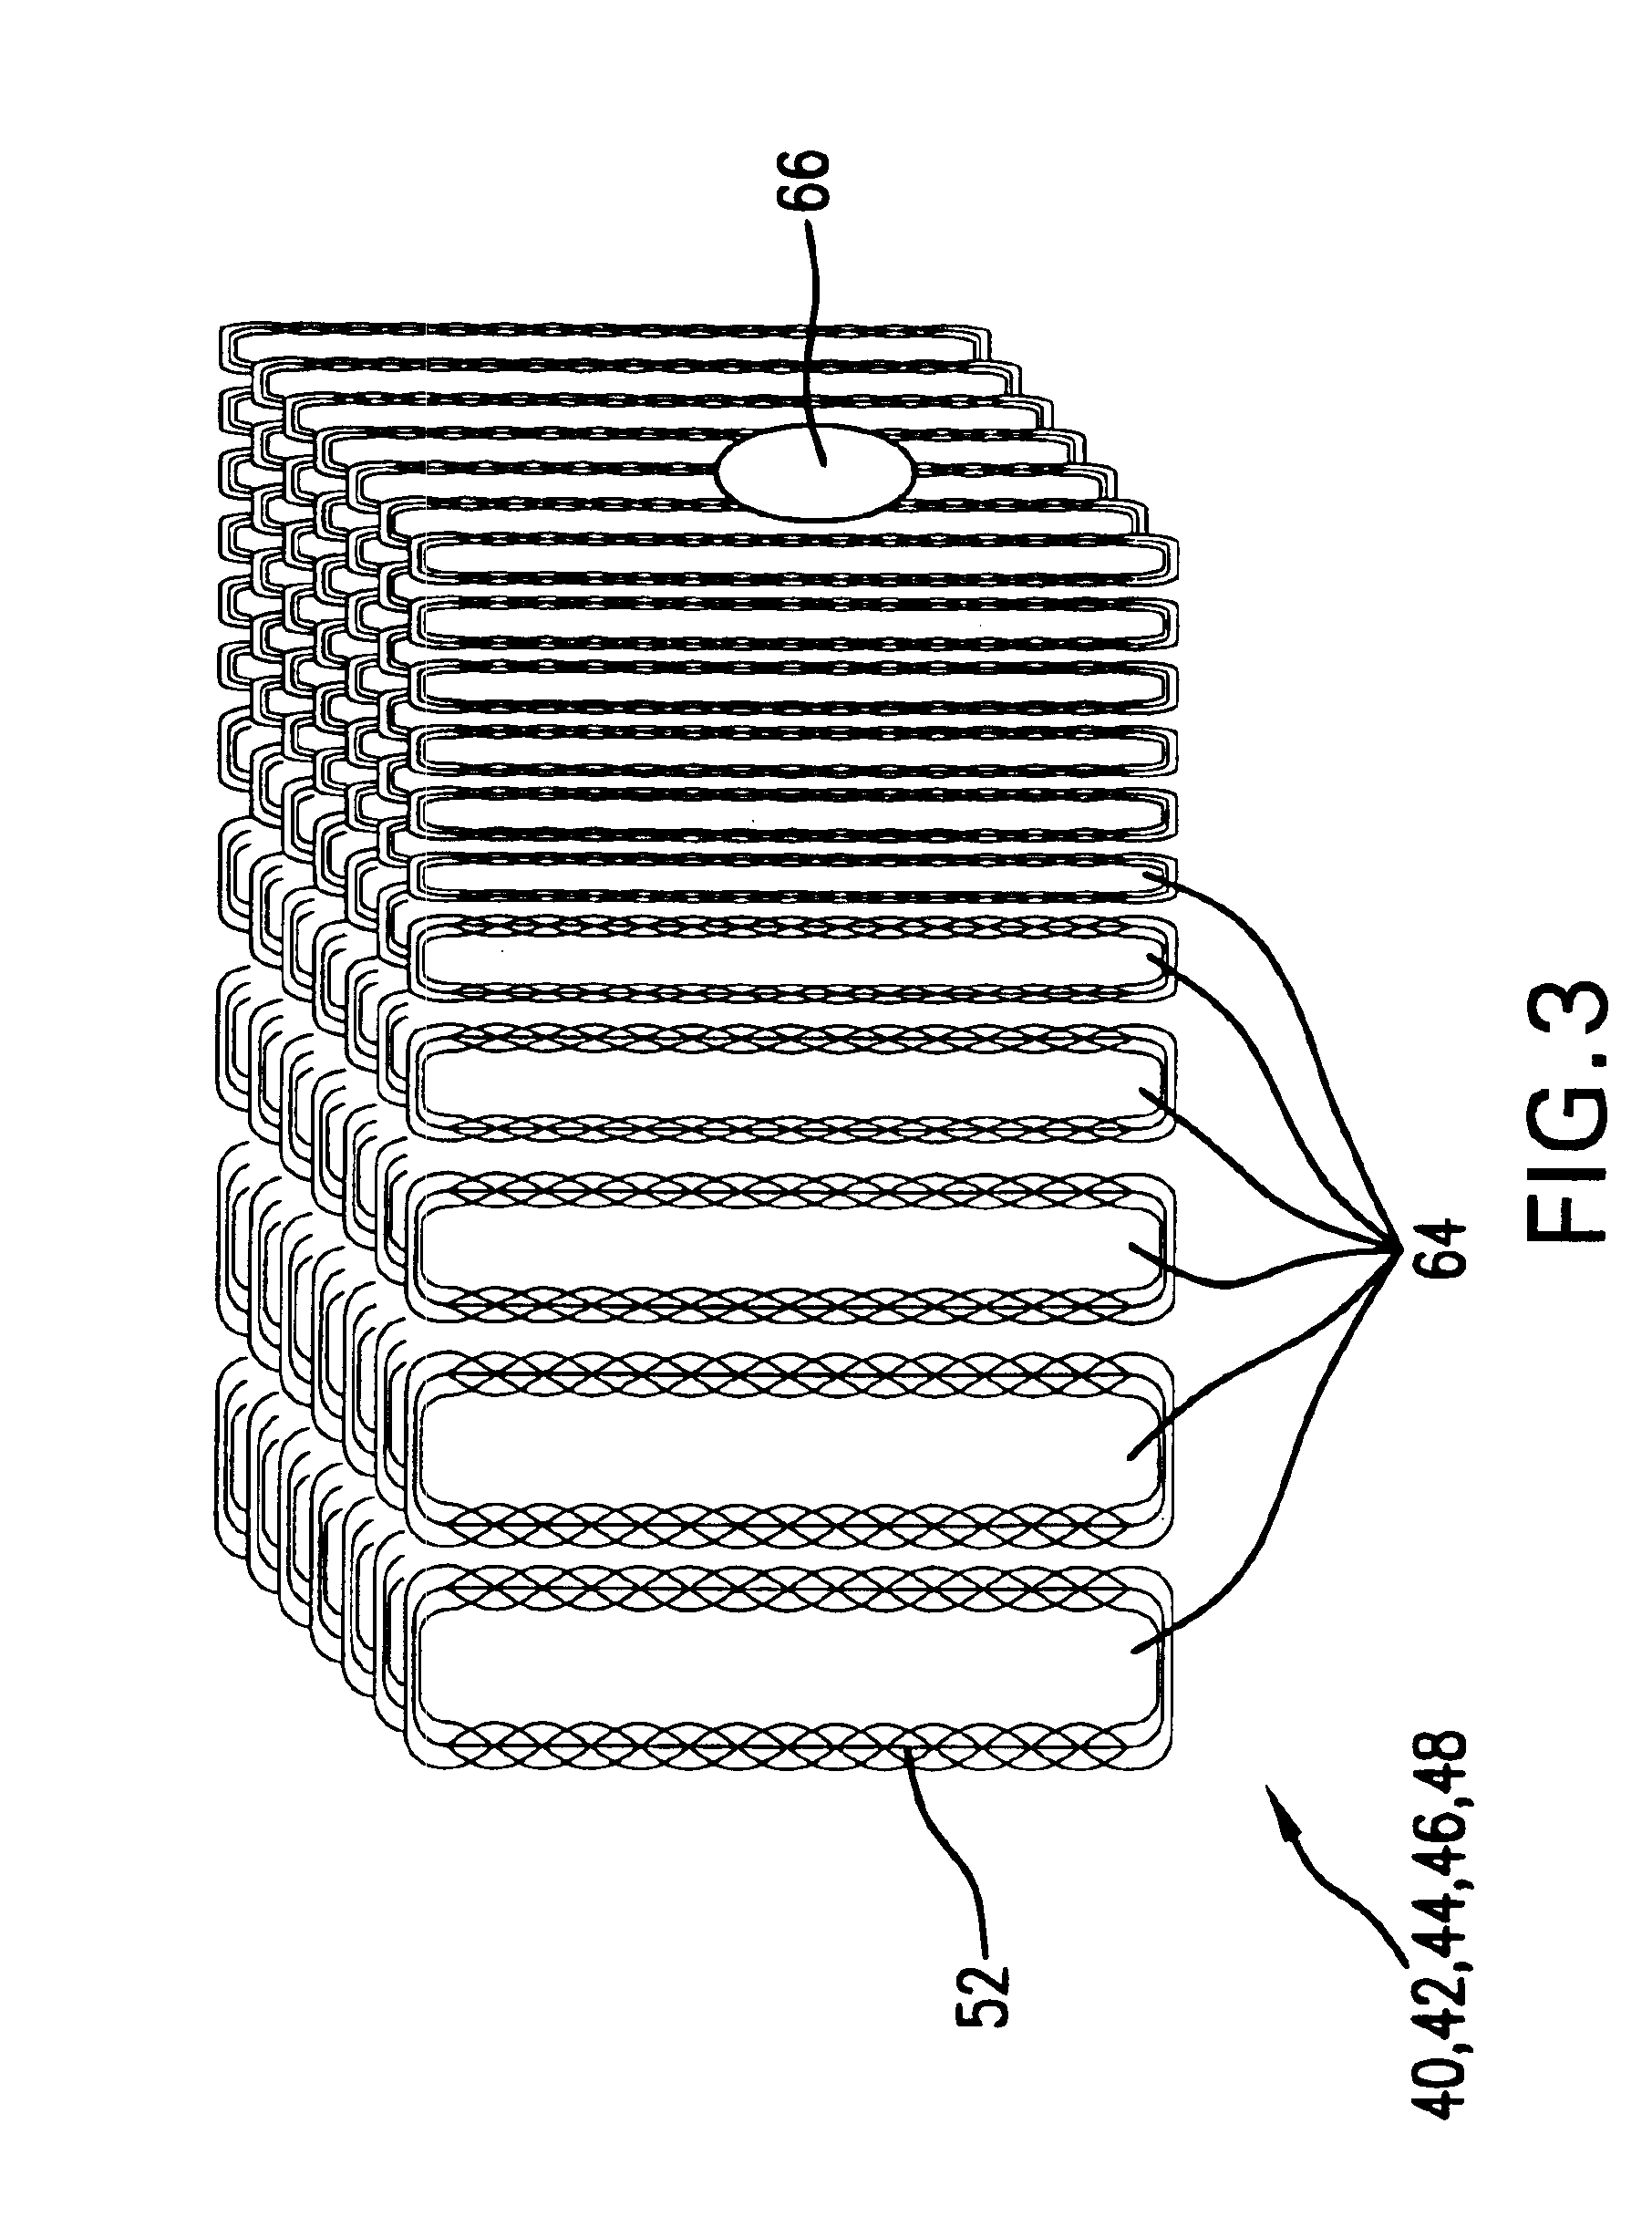 Enhanced heat transfer structure with heat transfer members of variable density